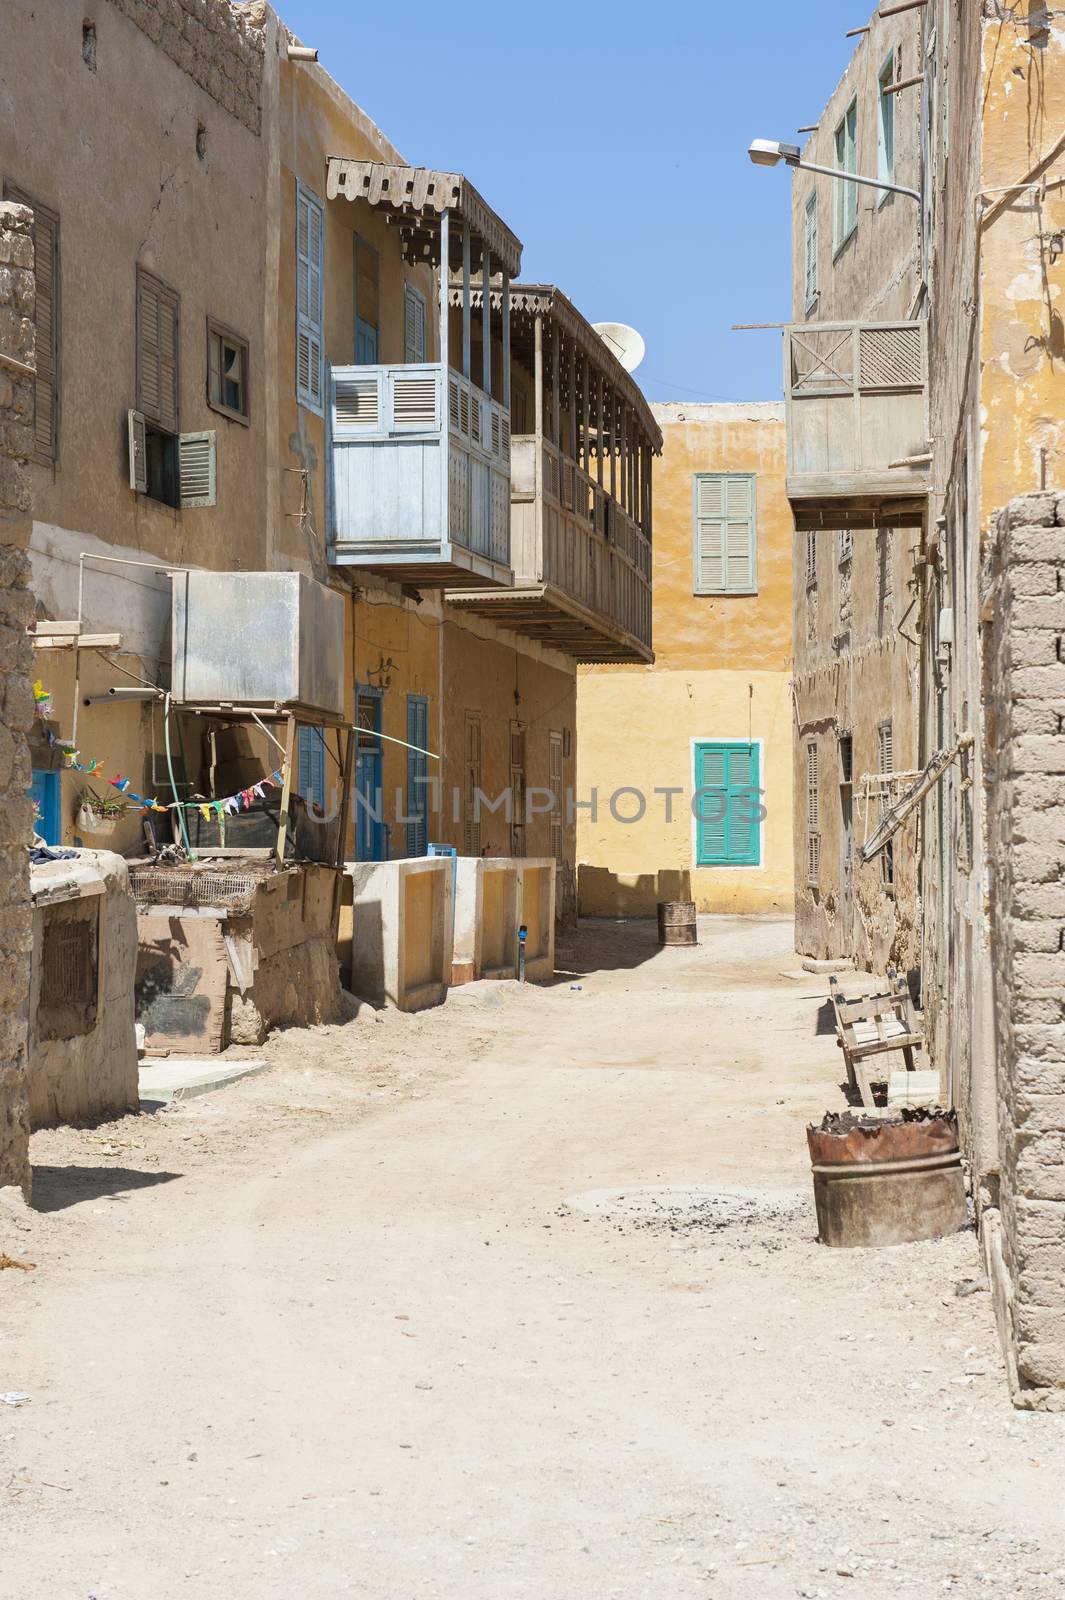 Old derelict traditional buildings with wooden balcony in an african egyptian town